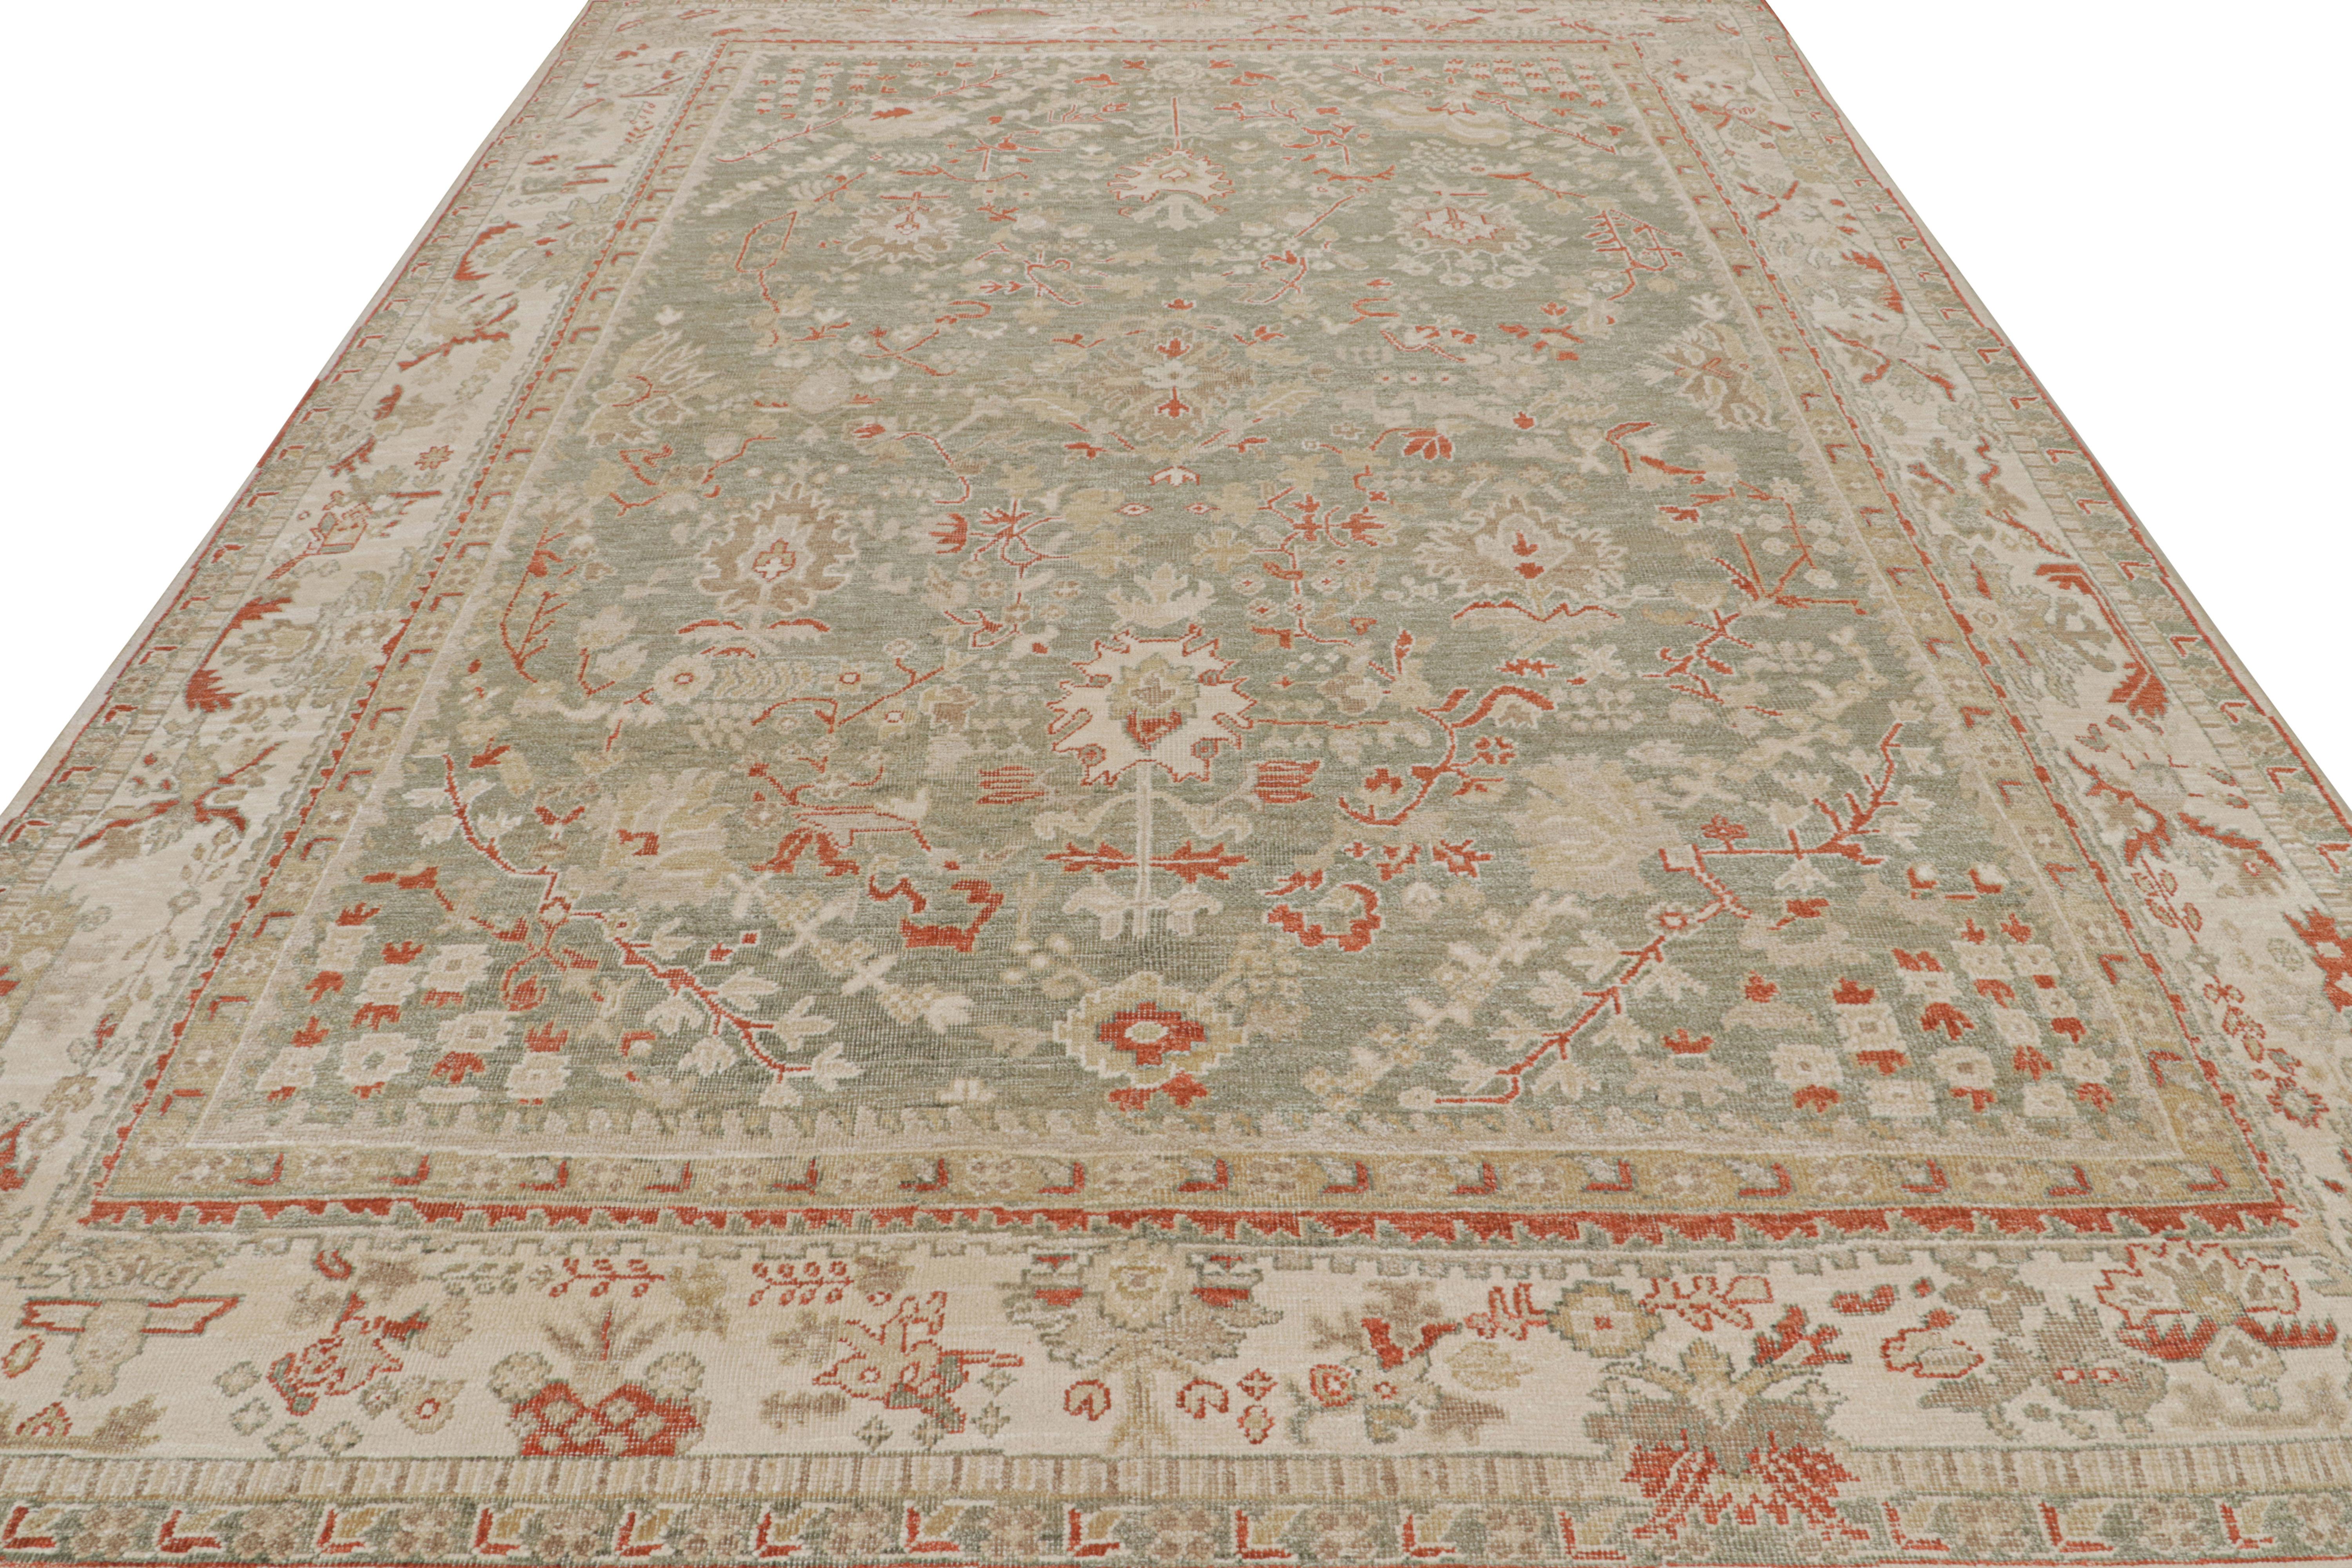 Indian Rug & Kilim’s Oushak Style Rug in Beige-Brown, Green Floral Patterns For Sale